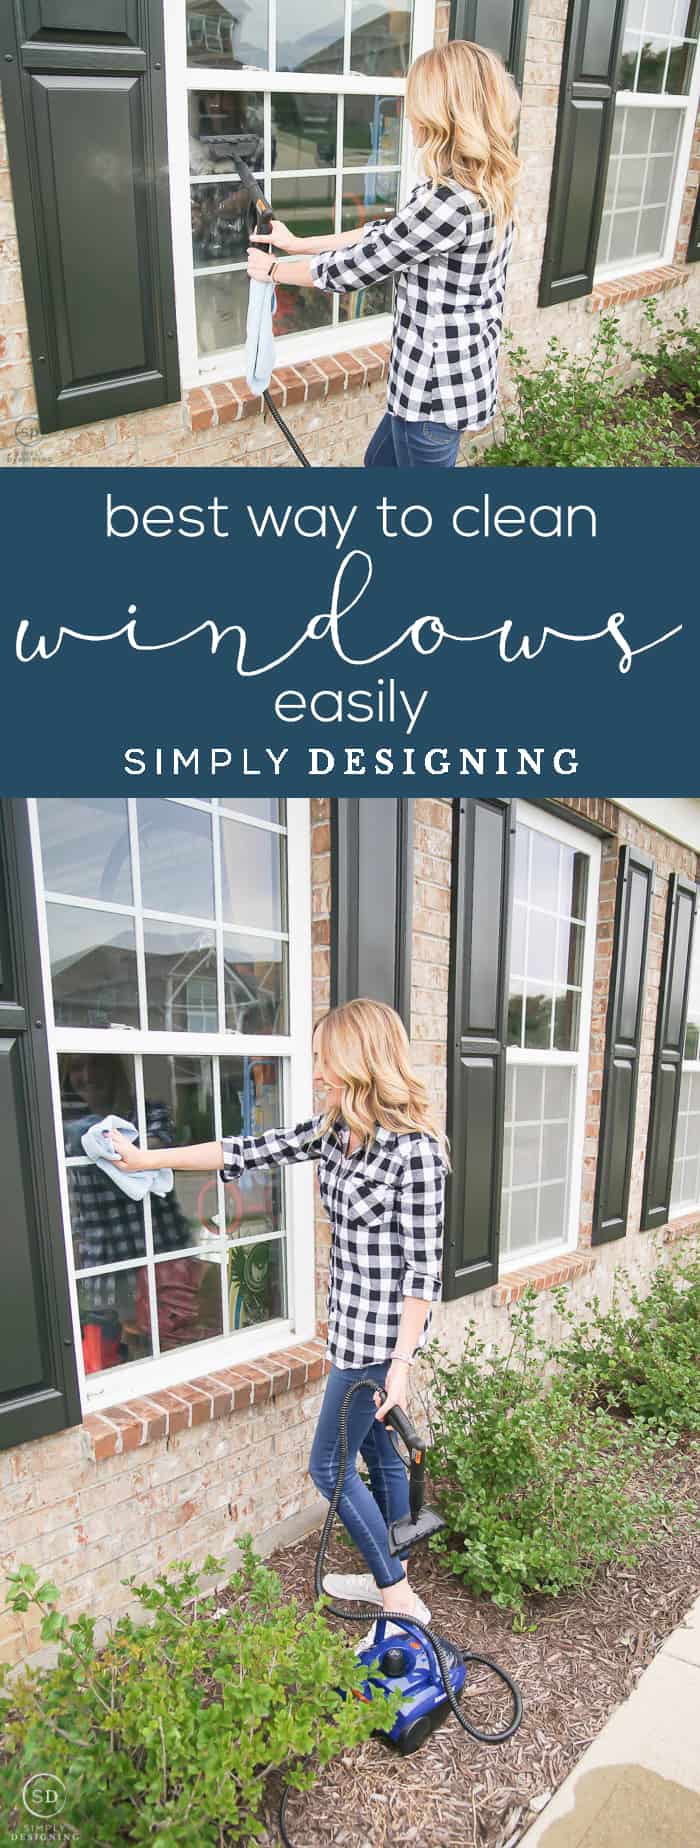 The Best Way to Clean Windows Easily - streak free windows - wash windows - fall cleaning